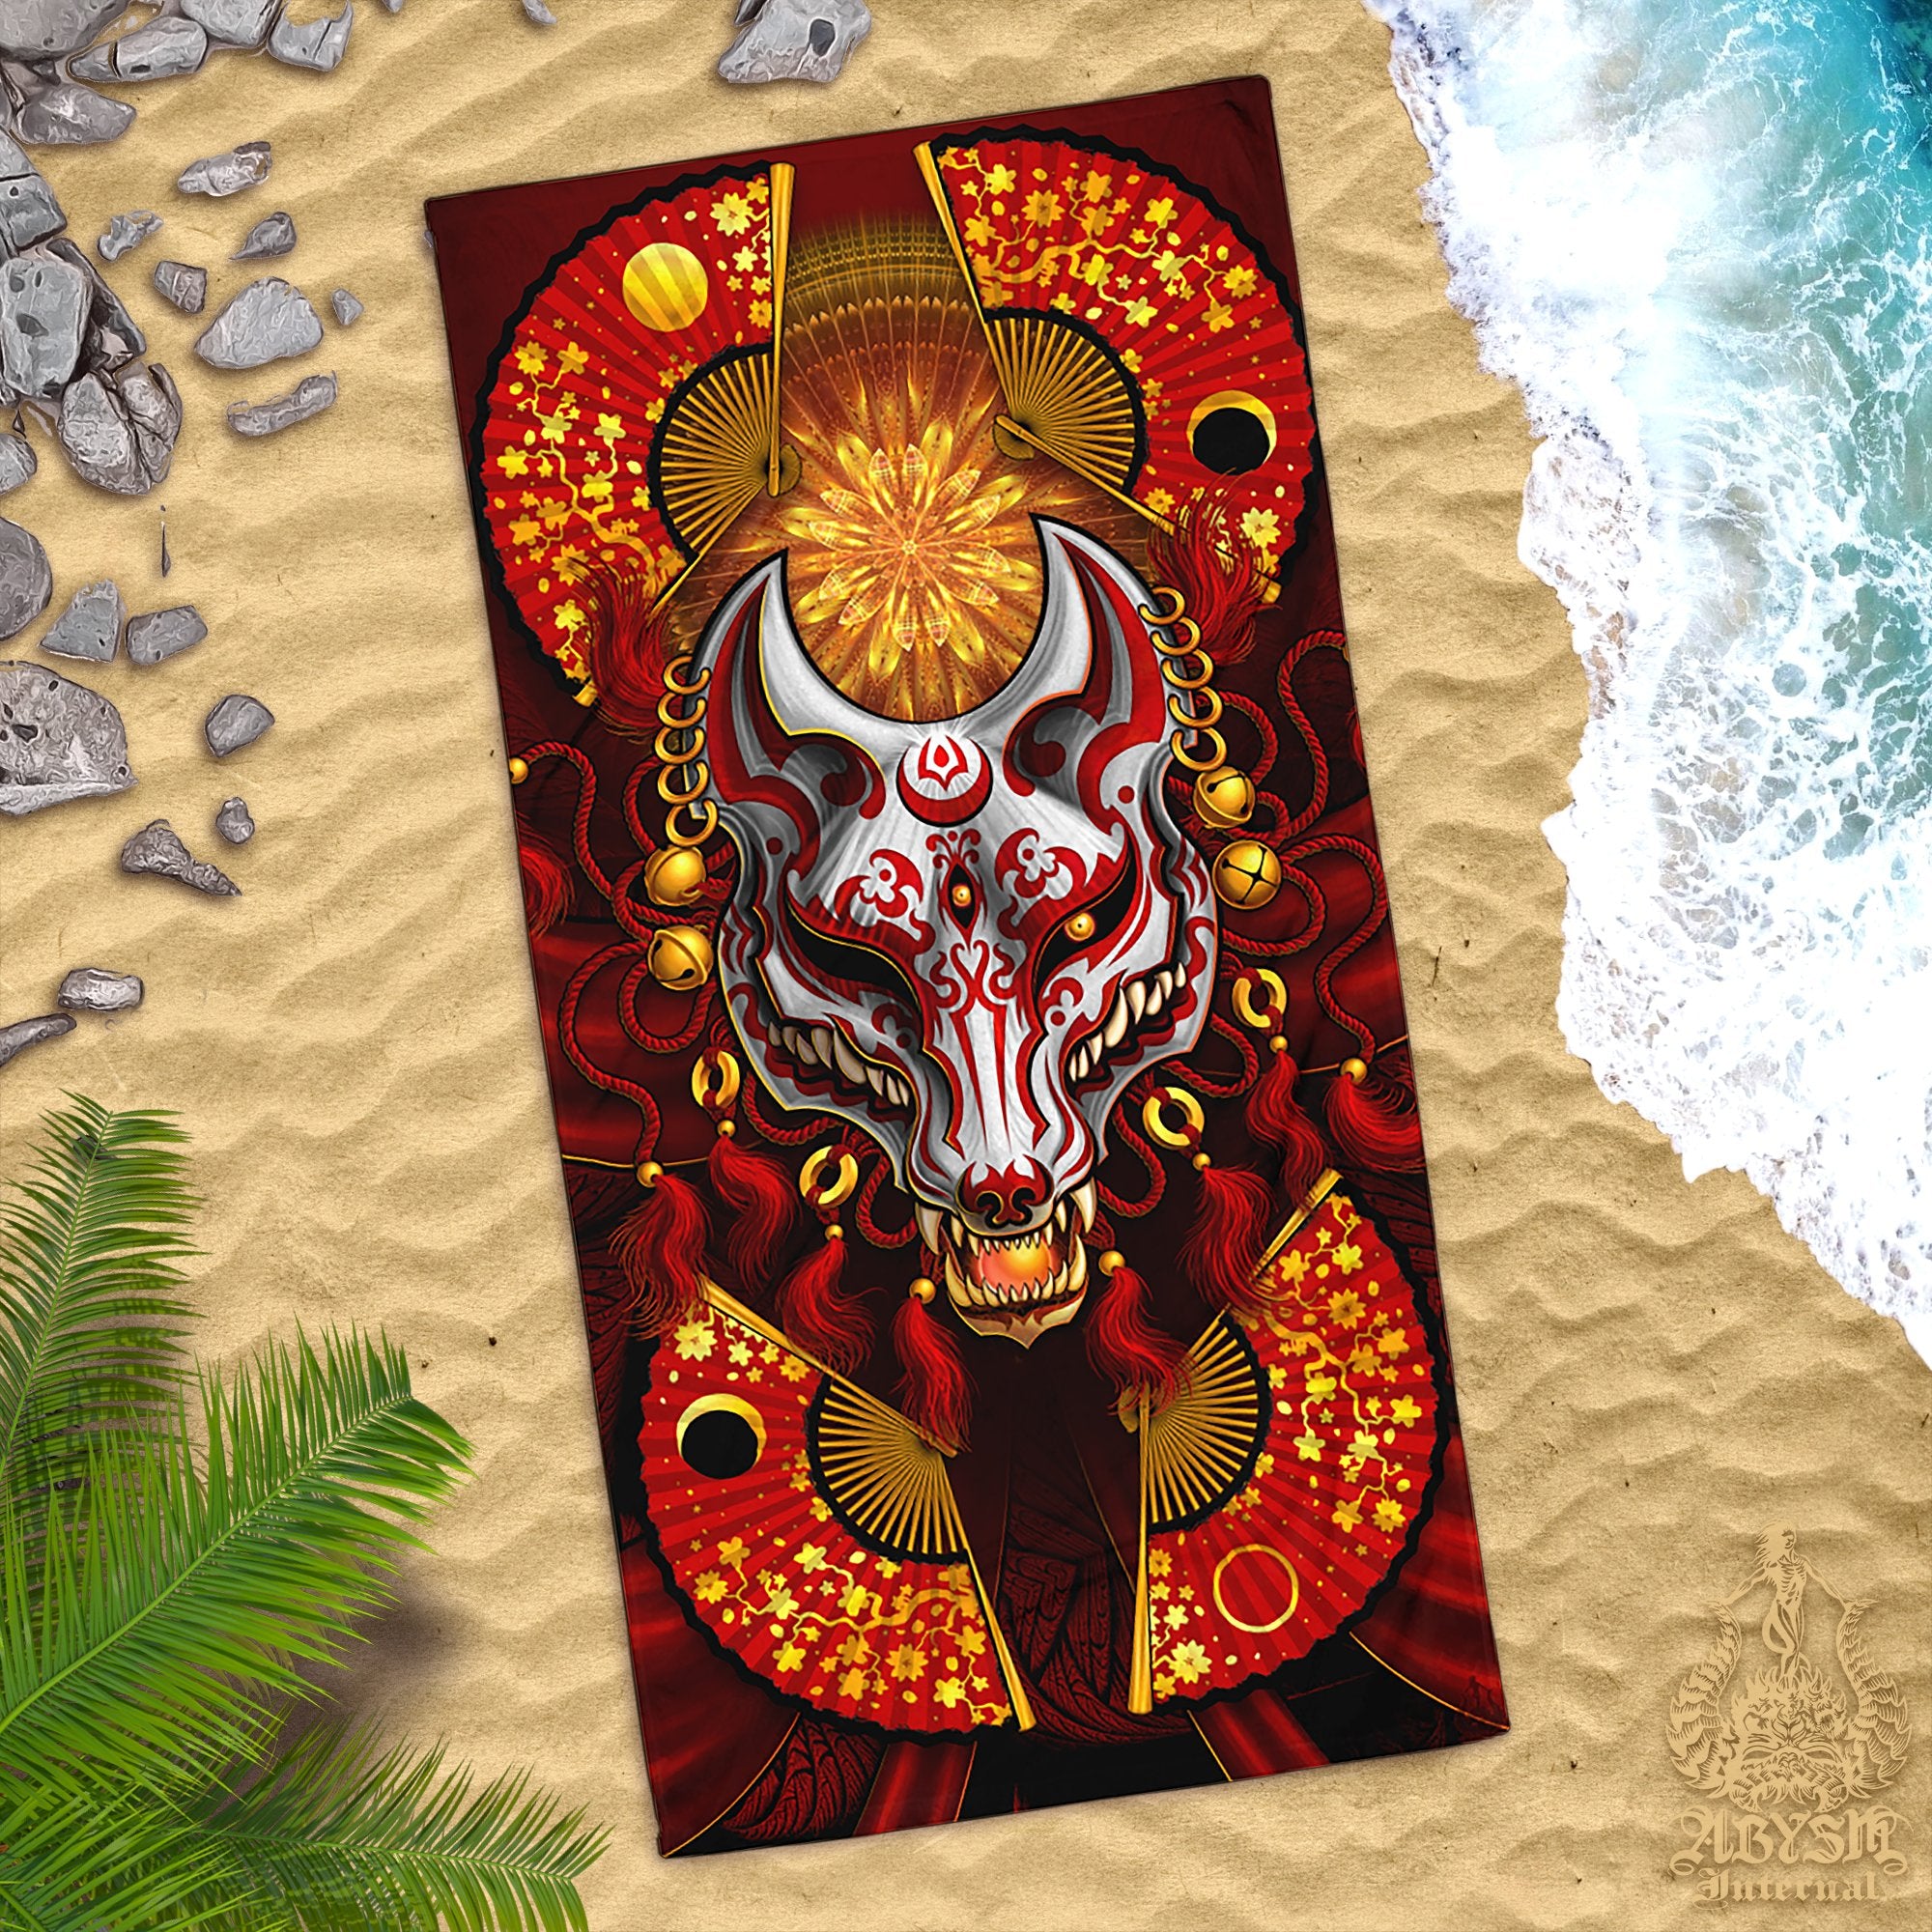 ALL Kitsune Beach Towel Designs, Fox Mask, Cool Gift Idea for Gamer, Japan Anime or Manga Gift - Red, black, White, Purple, Gold, Silver, 11 Colors - Abysm Internal